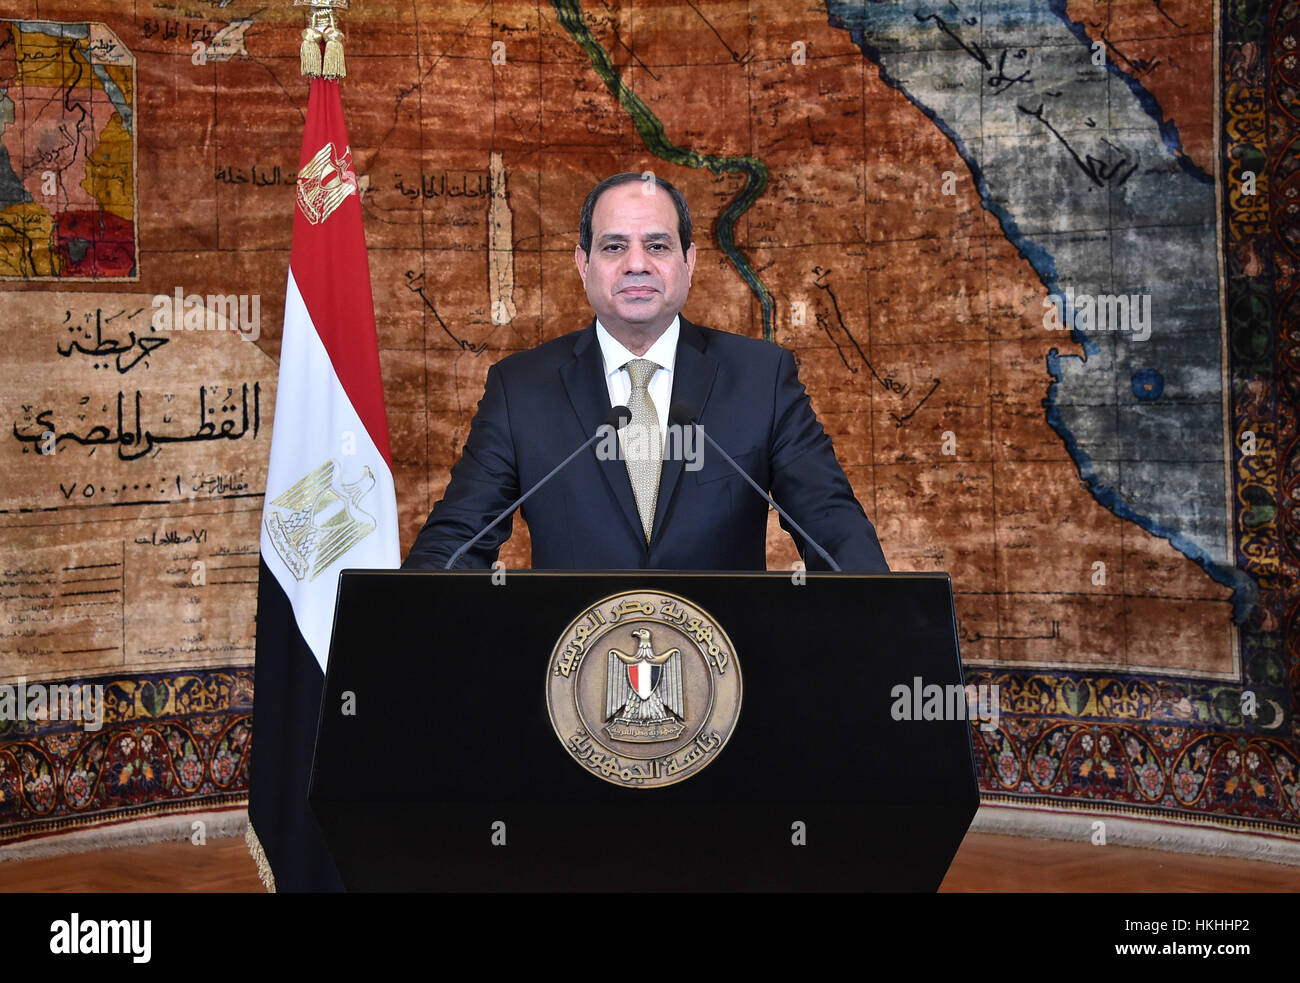 Cairo, Egypt - 25 January 2017 - Egyptian President Abdel Fatah Al Sisi addresses the nation on the anniversary of Police Day and marking the 25th January revolution.  (Egyptian Presidency Pool Photo) Stock Photo